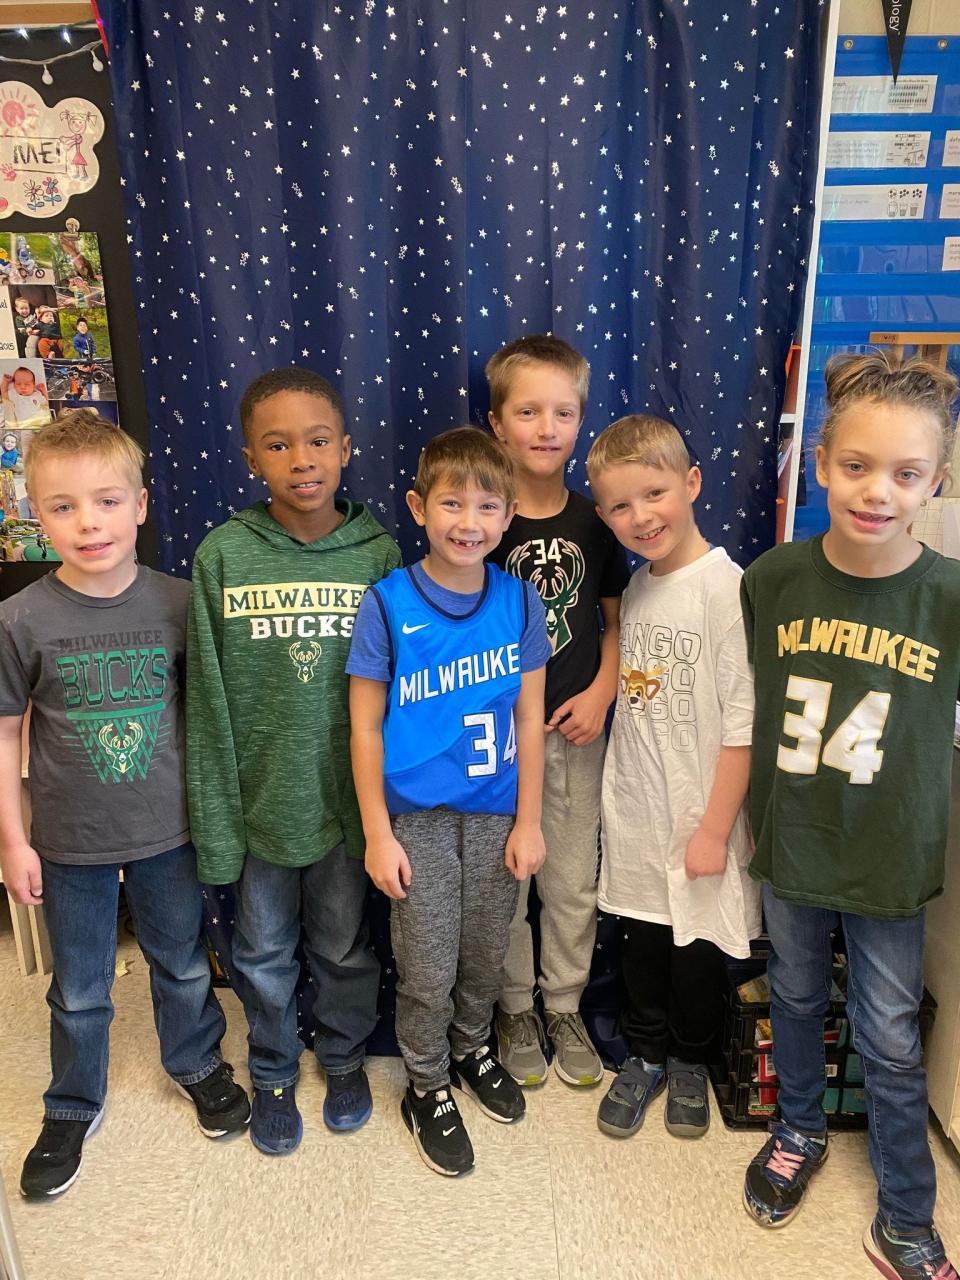 Andrew, Chase, Silas, Jacob, David, and Bailey dress up for Bucks Day at their Menomonee Falls elementary school.